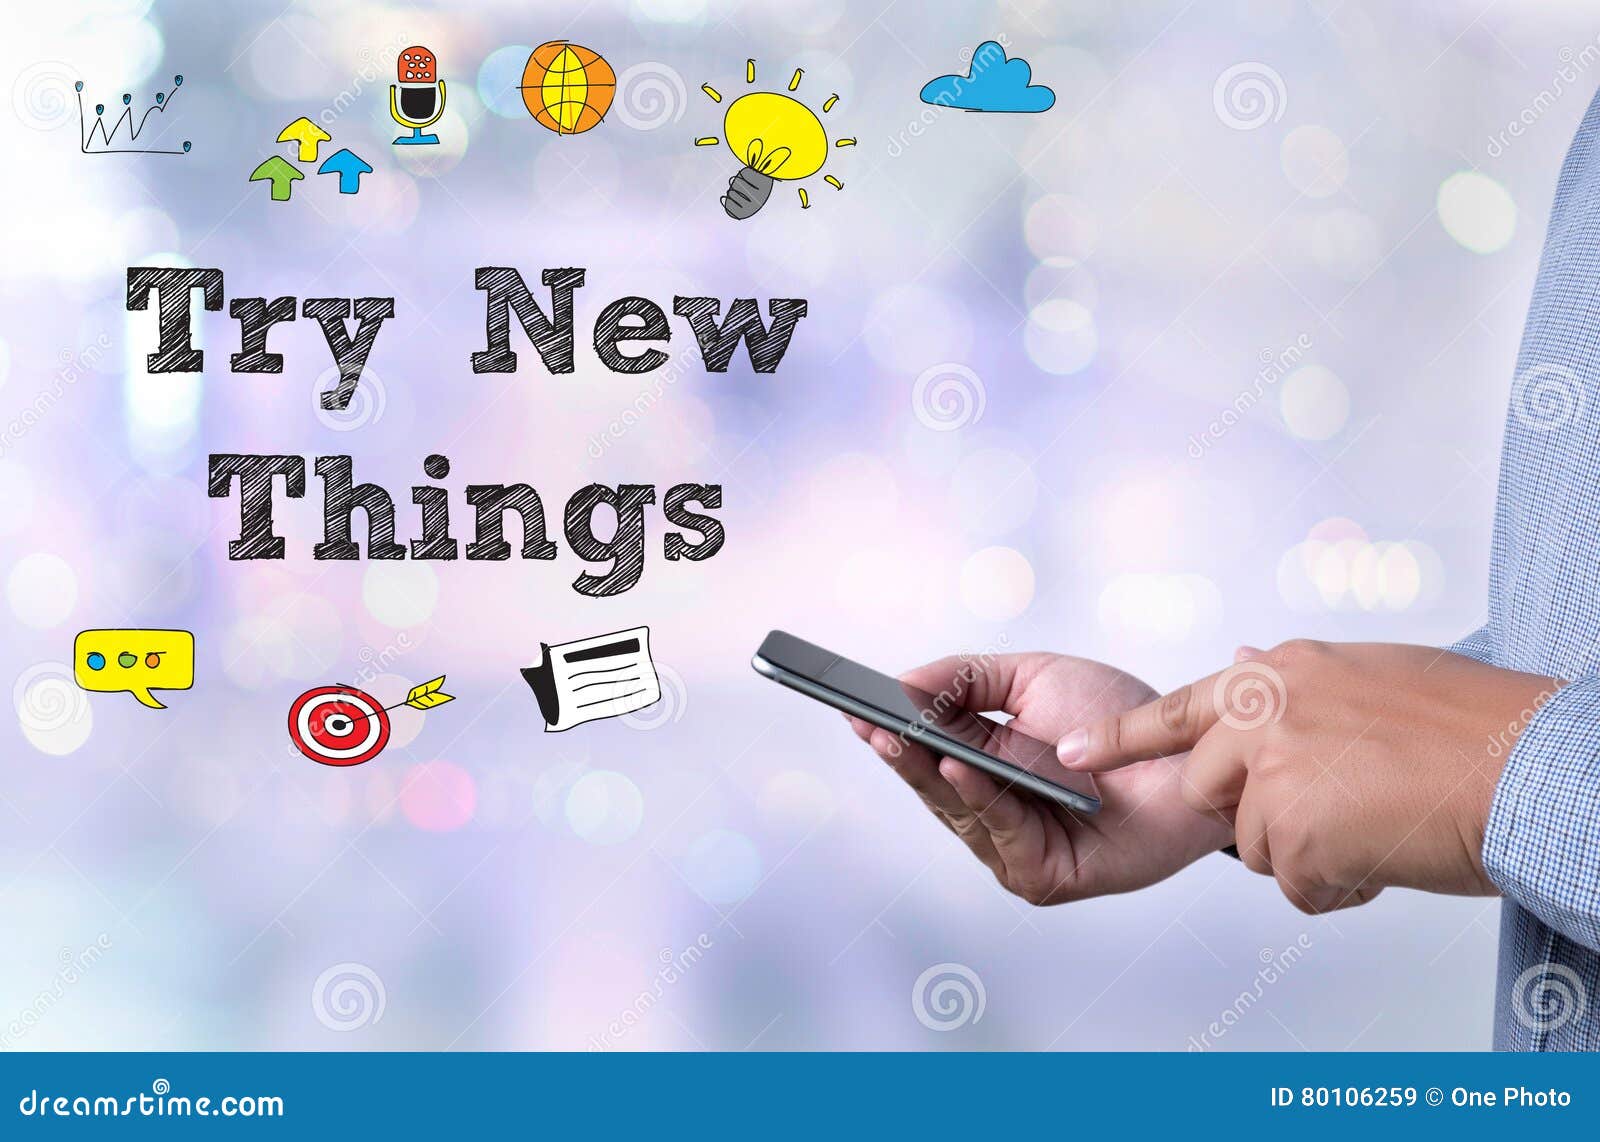 Now things new. Try New things. Try it Now.